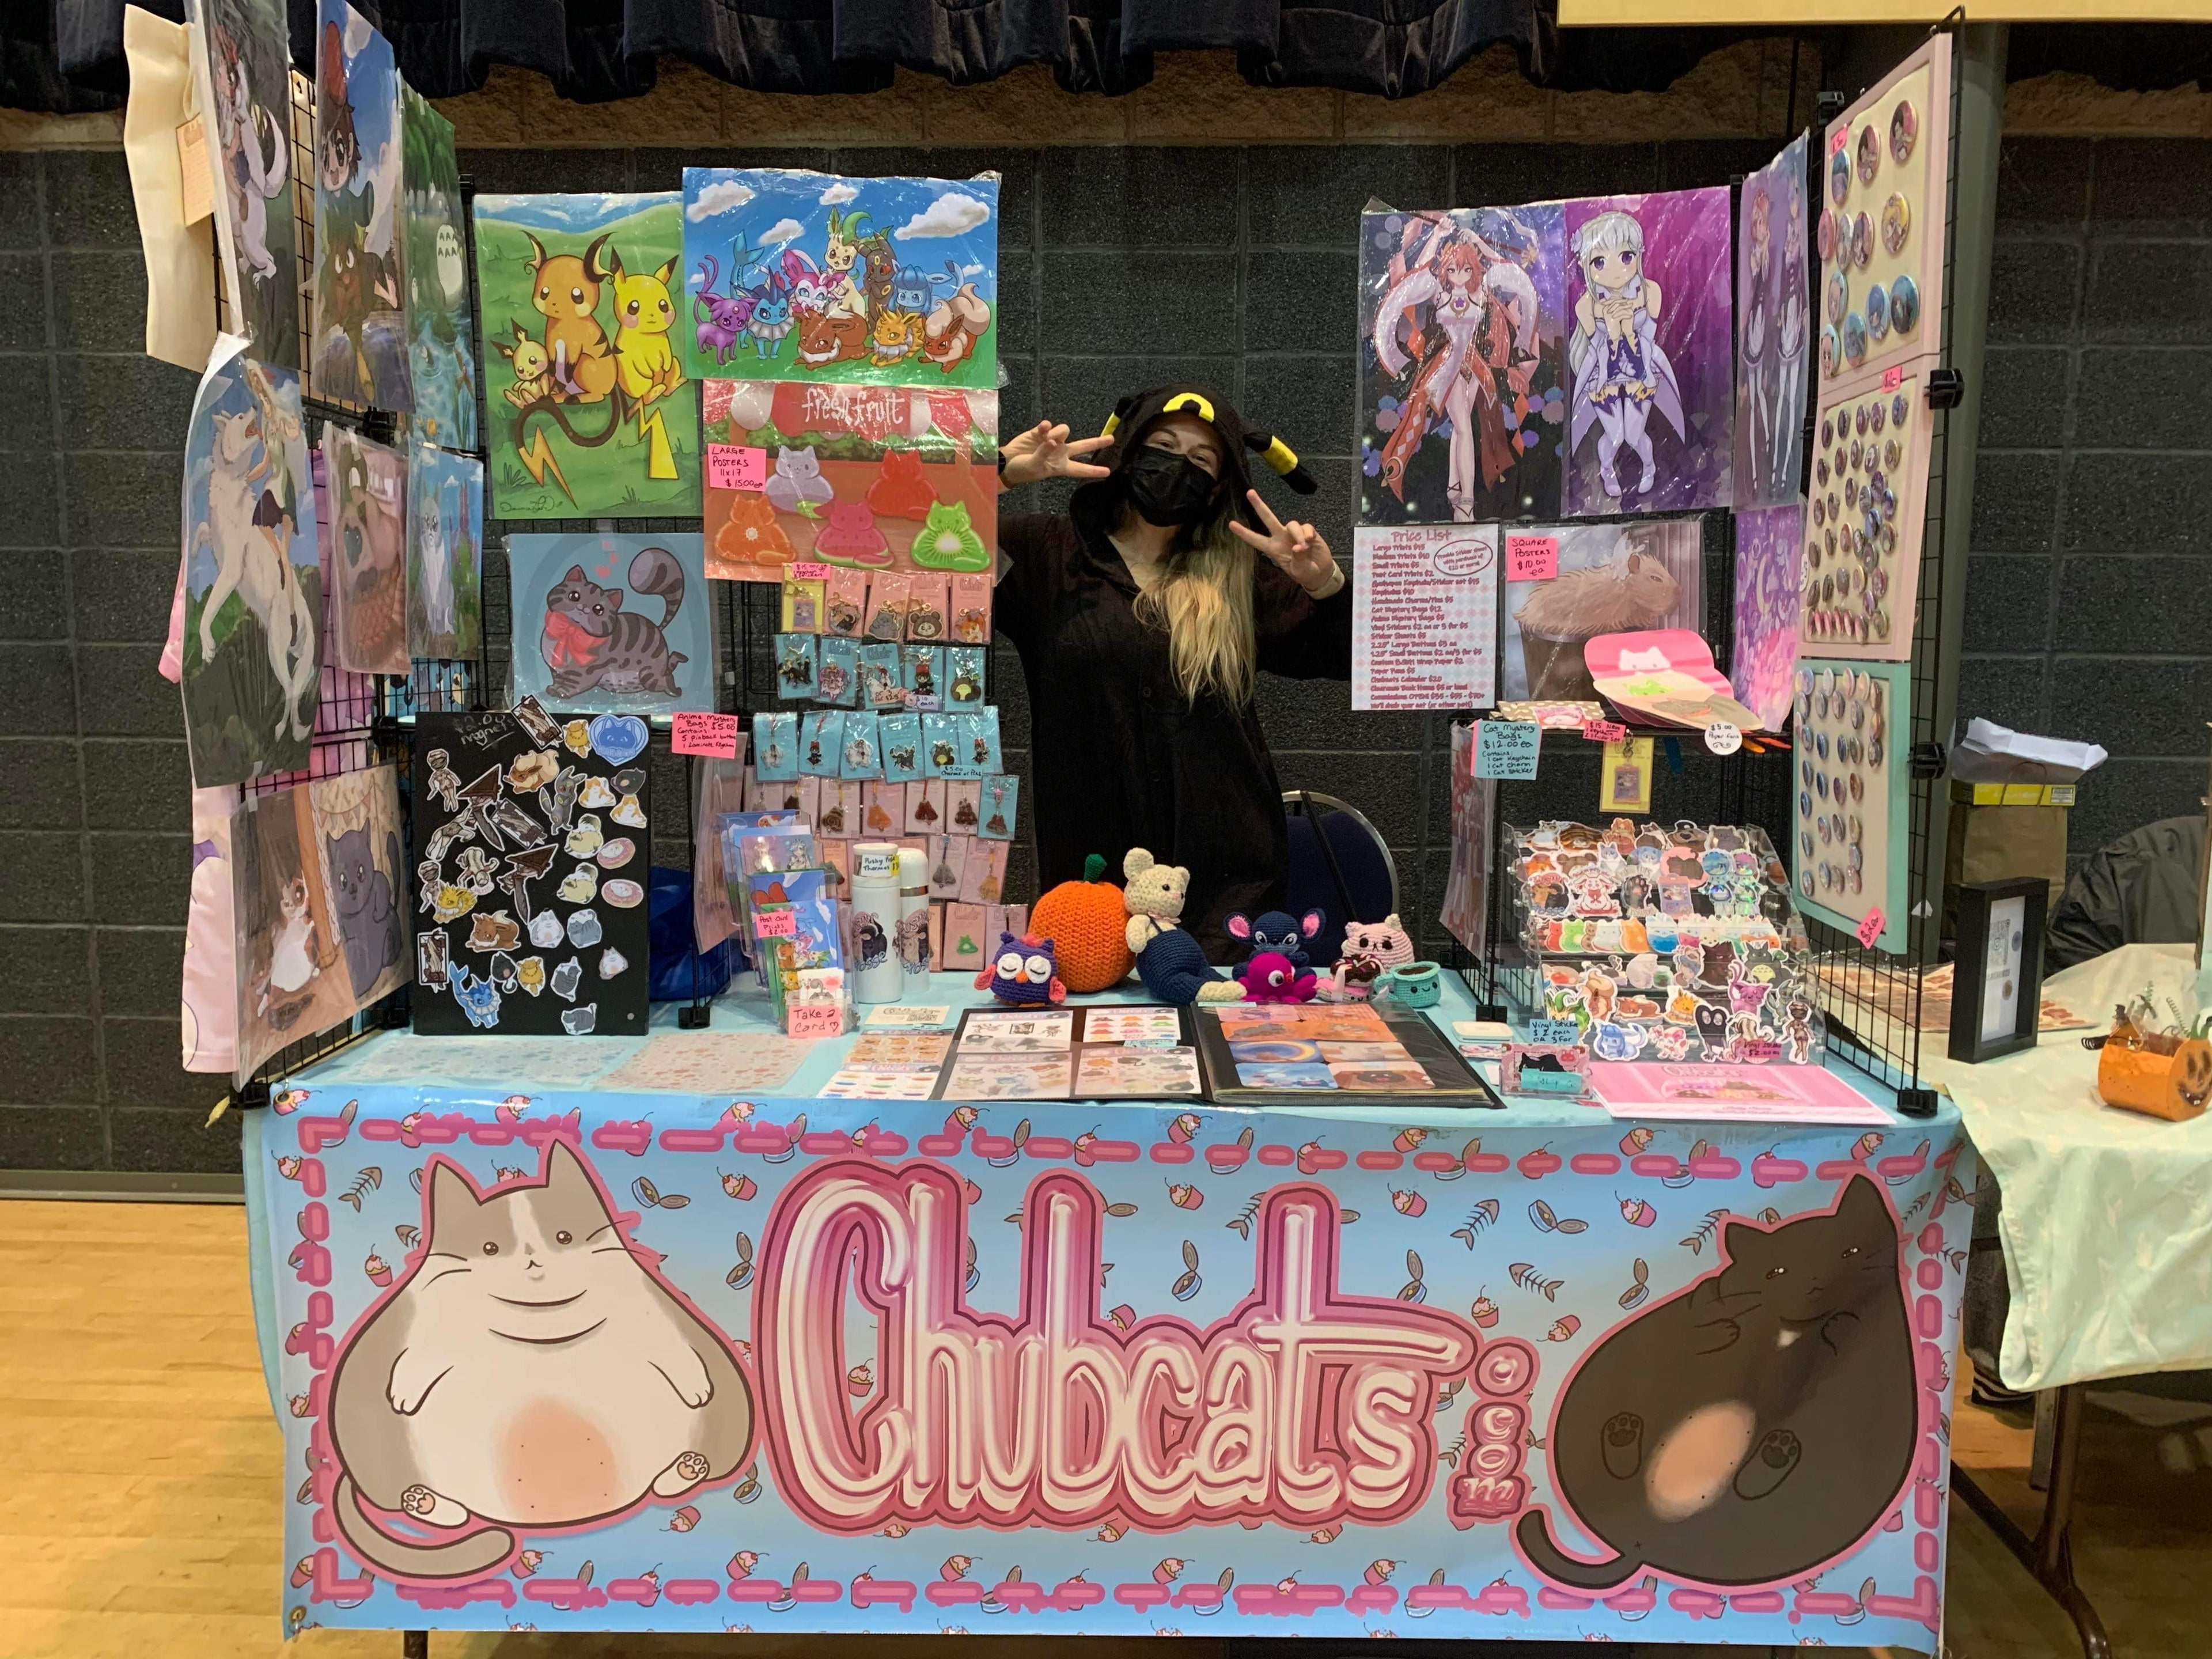 Load video: Chubcats Booth at Comicon in April!